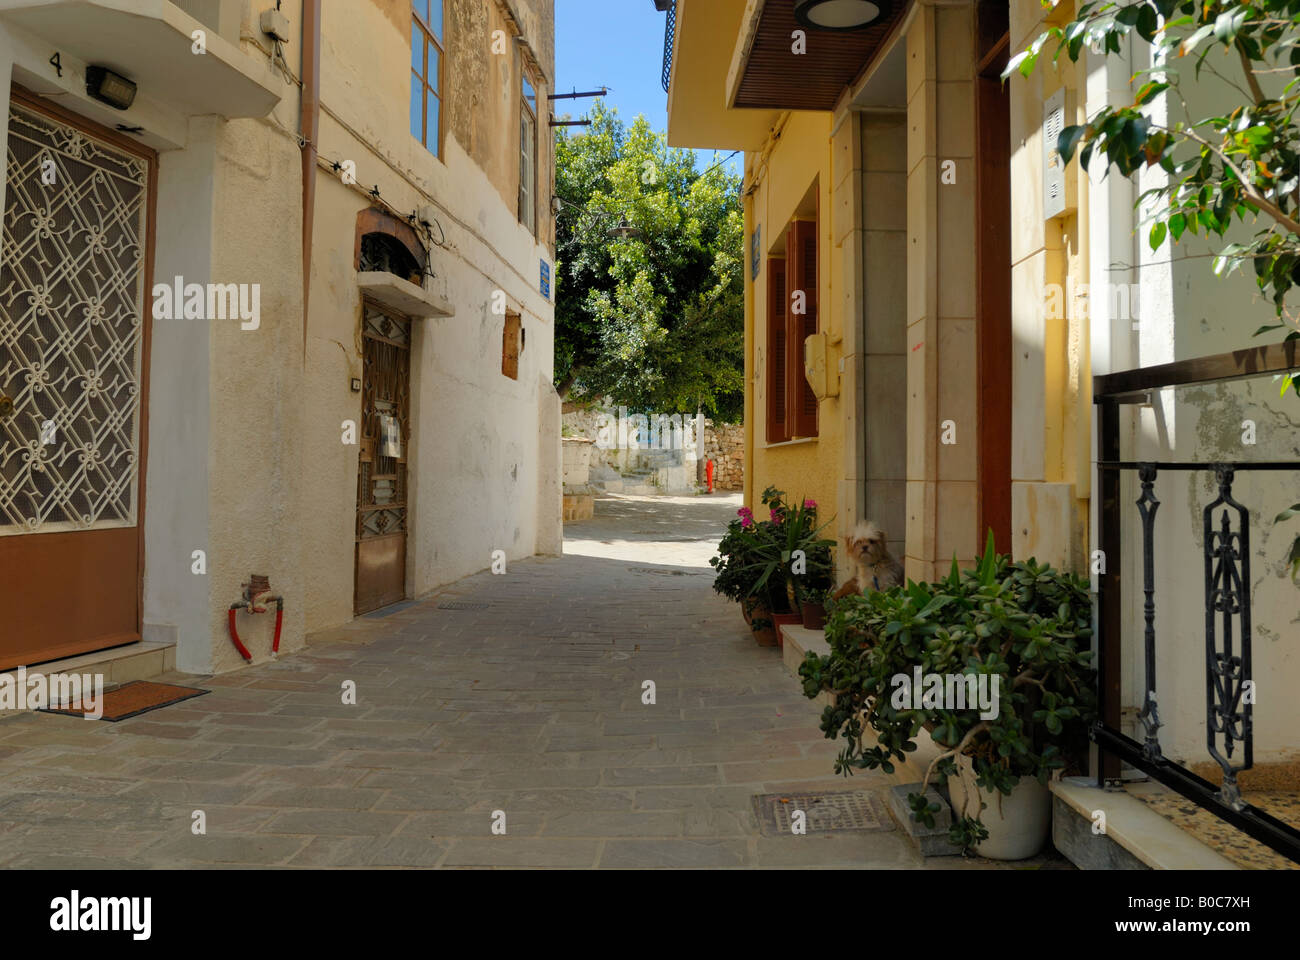 A fine street view at old town of Chania, Crete, Greece, Europe. Stock Photo